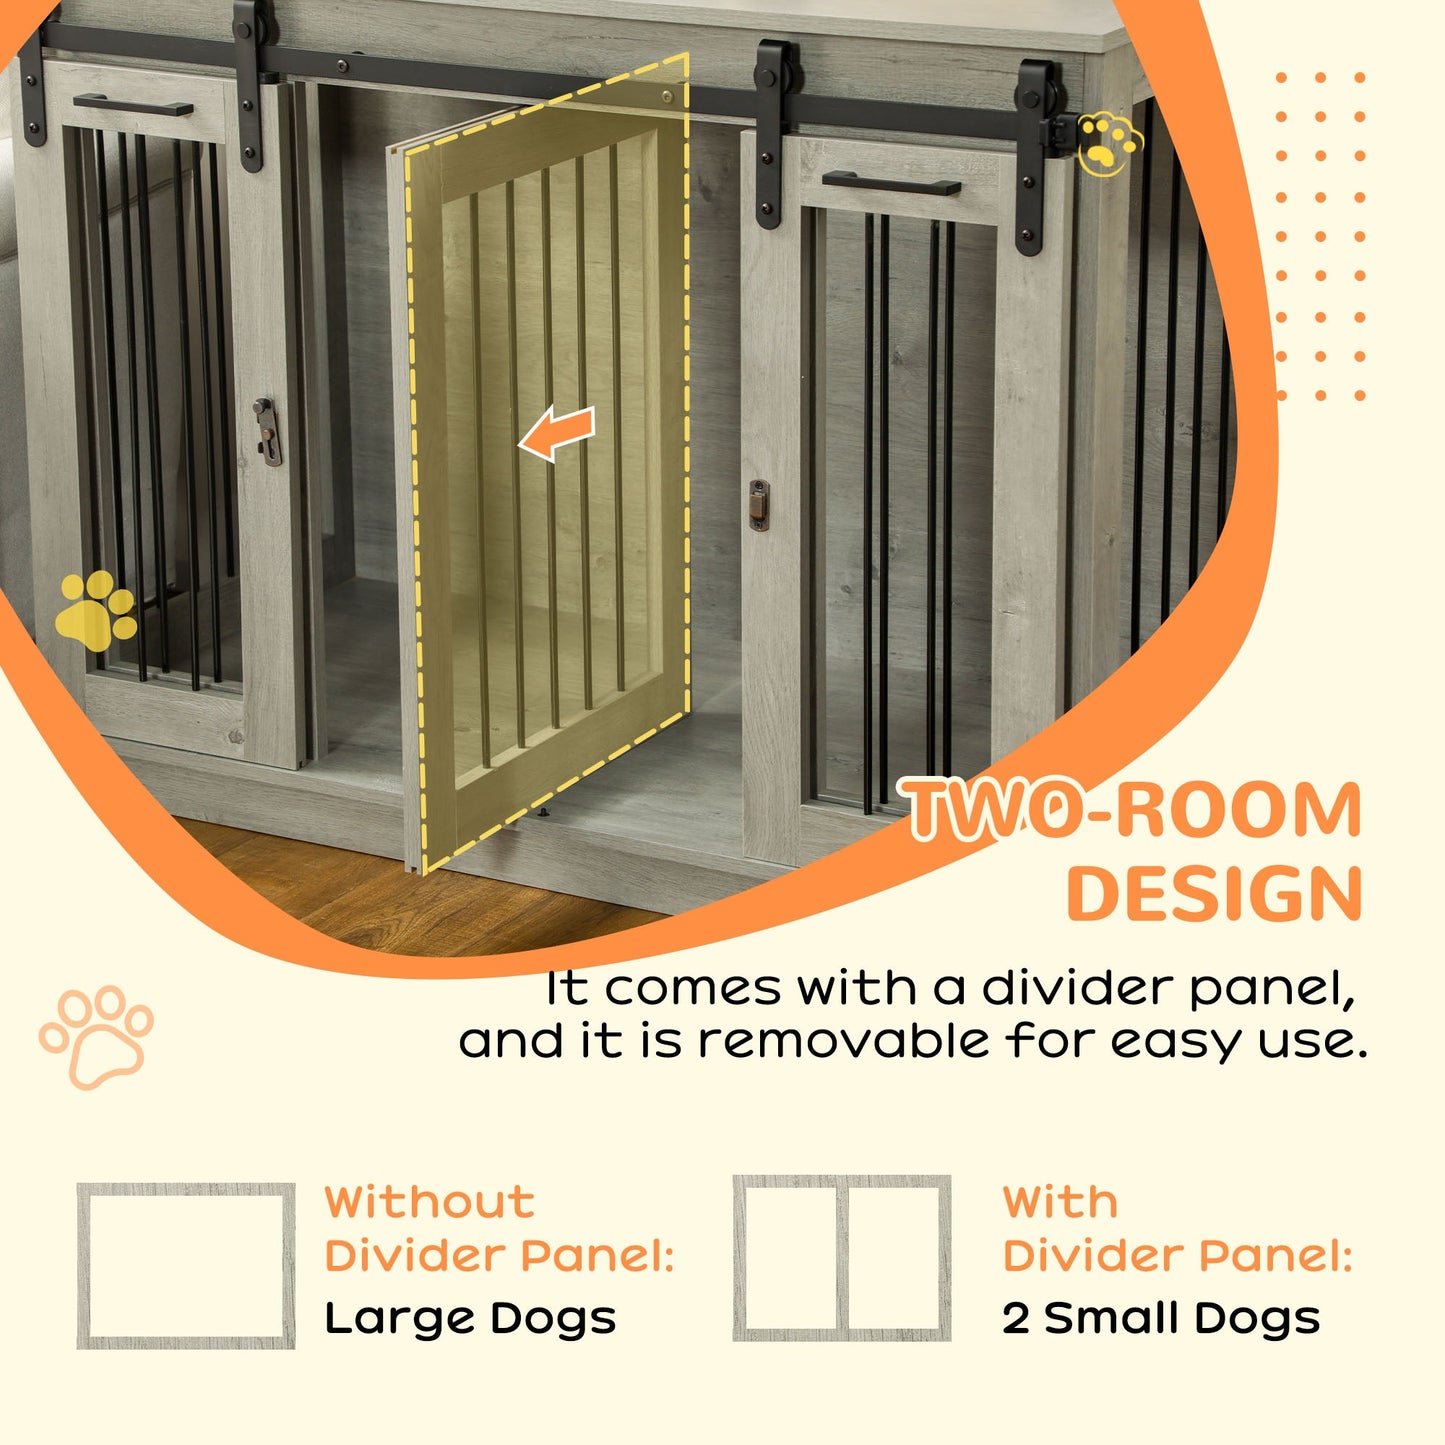 Pet Supplies-Dog Crate, Dog Cage End Table with Divider Panel, Dog Crate Furniture for Large Dog and 2 Small Dogs, Gray - Outdoor Style Company